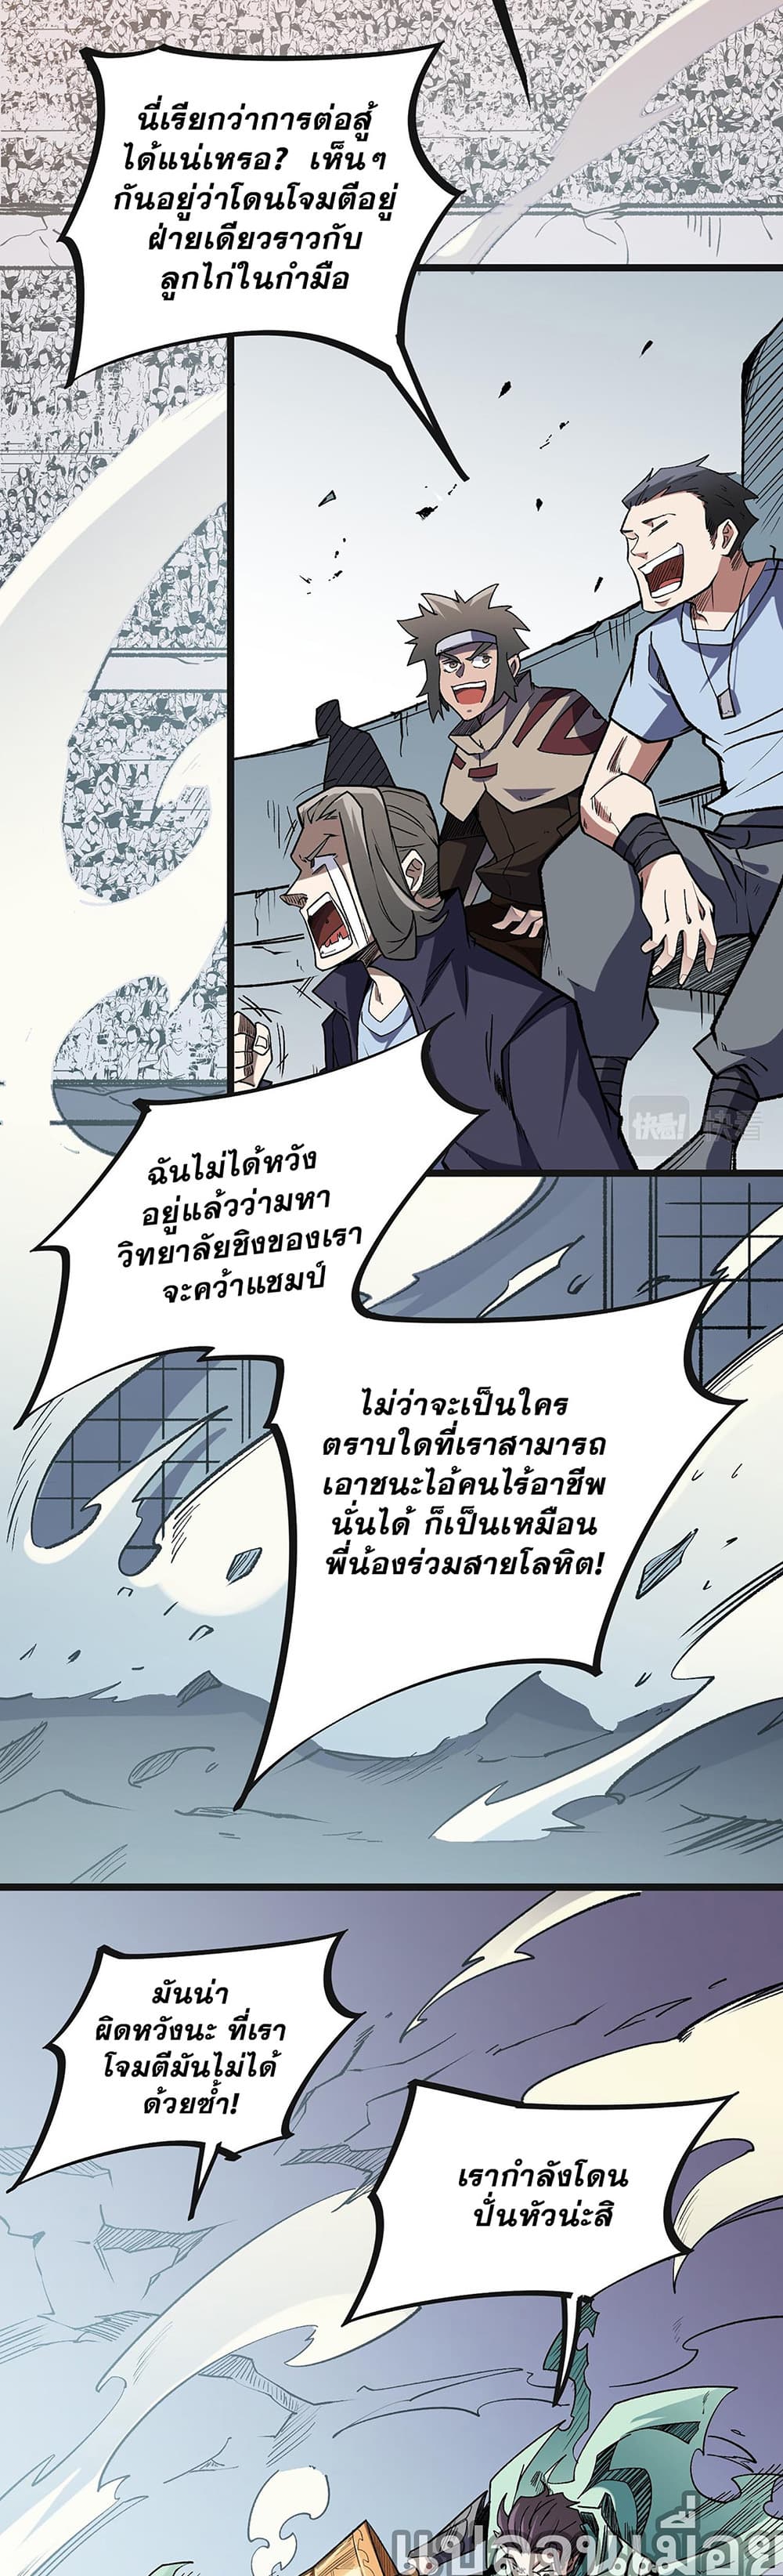 Job Changing for the Entire Population: The Jobless Me Will Terminate the Gods ฉันคือผู้เล่นไร้อาชีพที่สังหารเหล่าเทพ 36-36